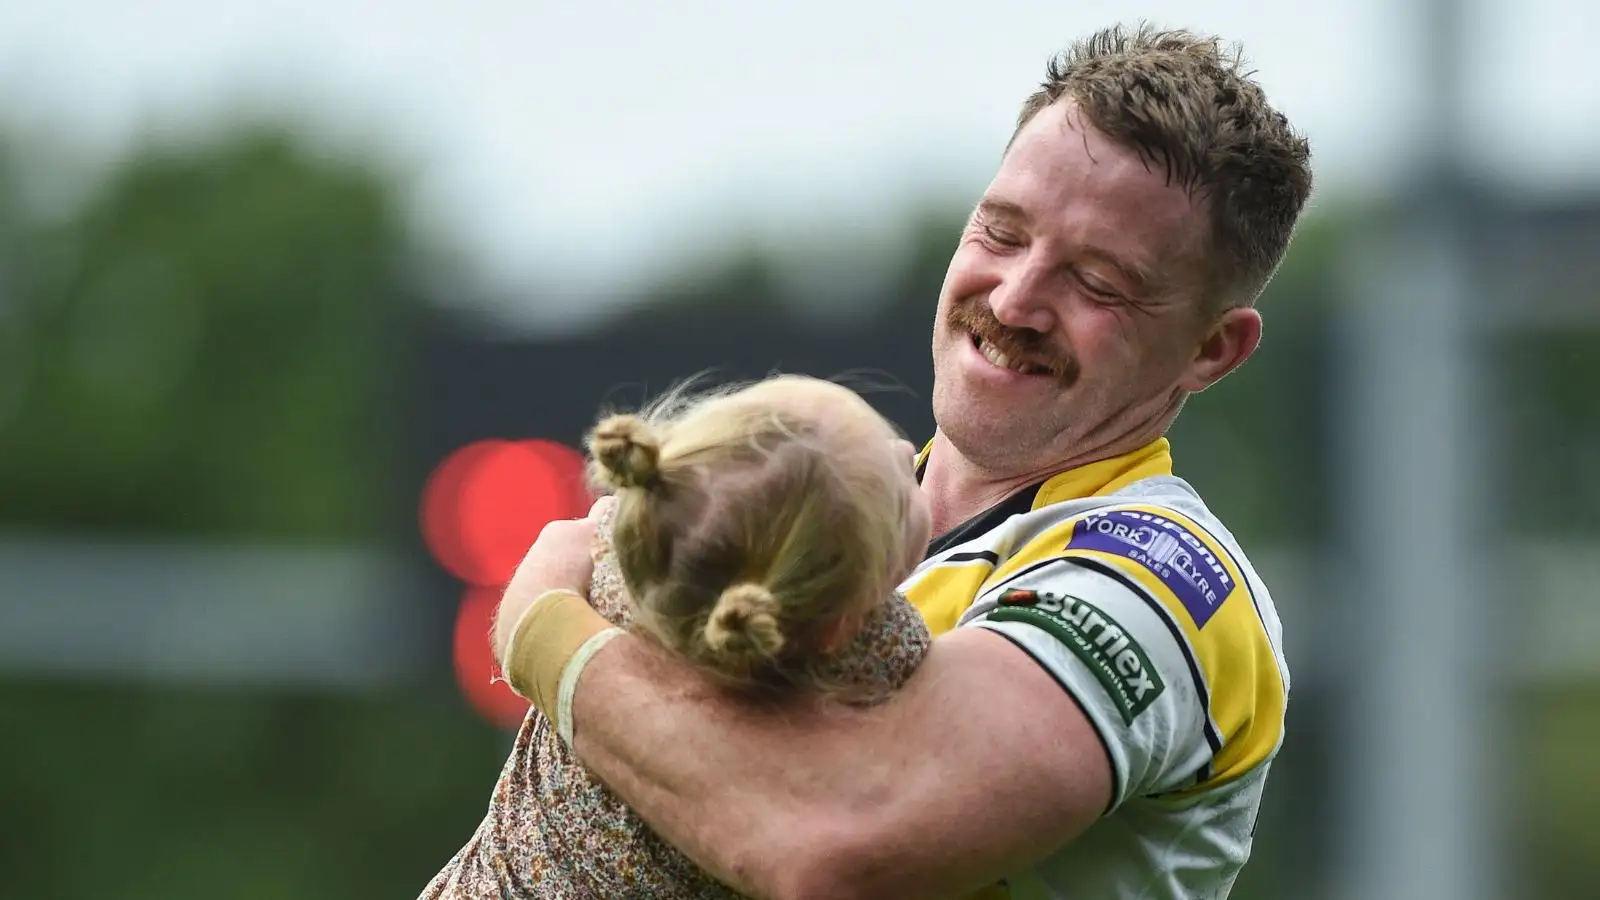 Former Super League stalwart calls time on playing career: ‘I owe so much to the game of rugby league’